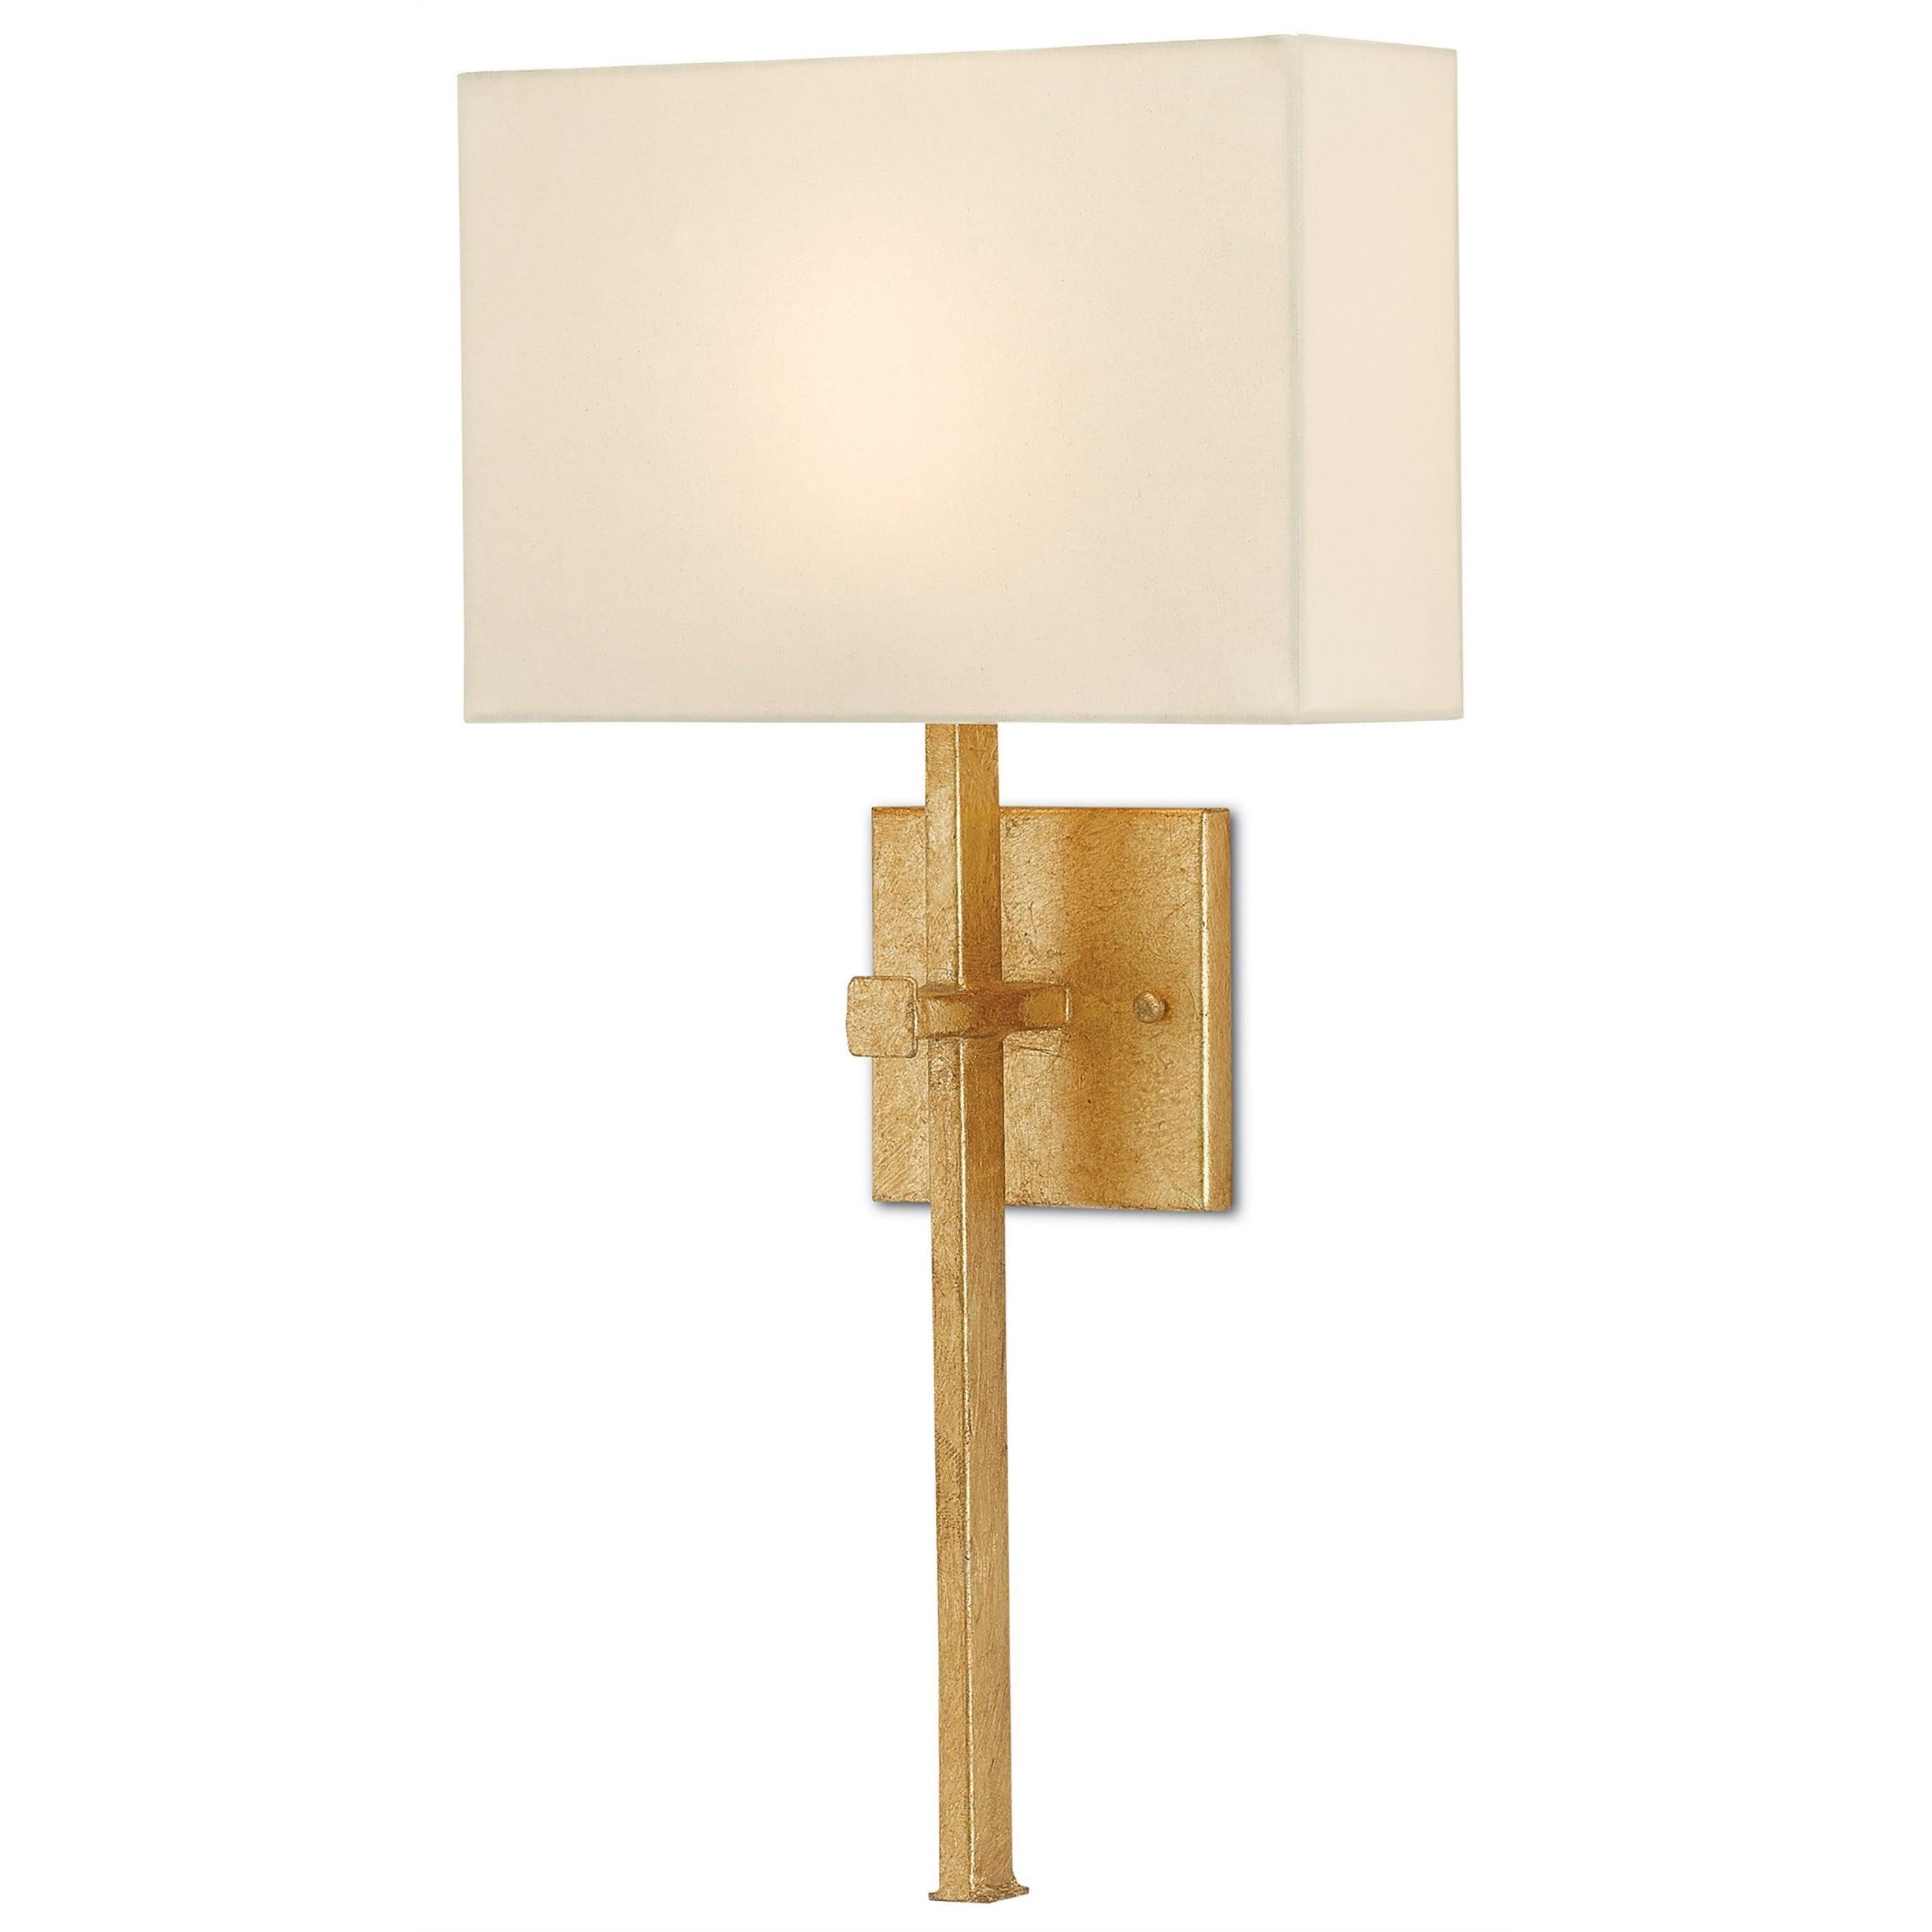 Currey and Company - Ashdown Wall Sconce - 5900-0005 | Montreal Lighting & Hardware